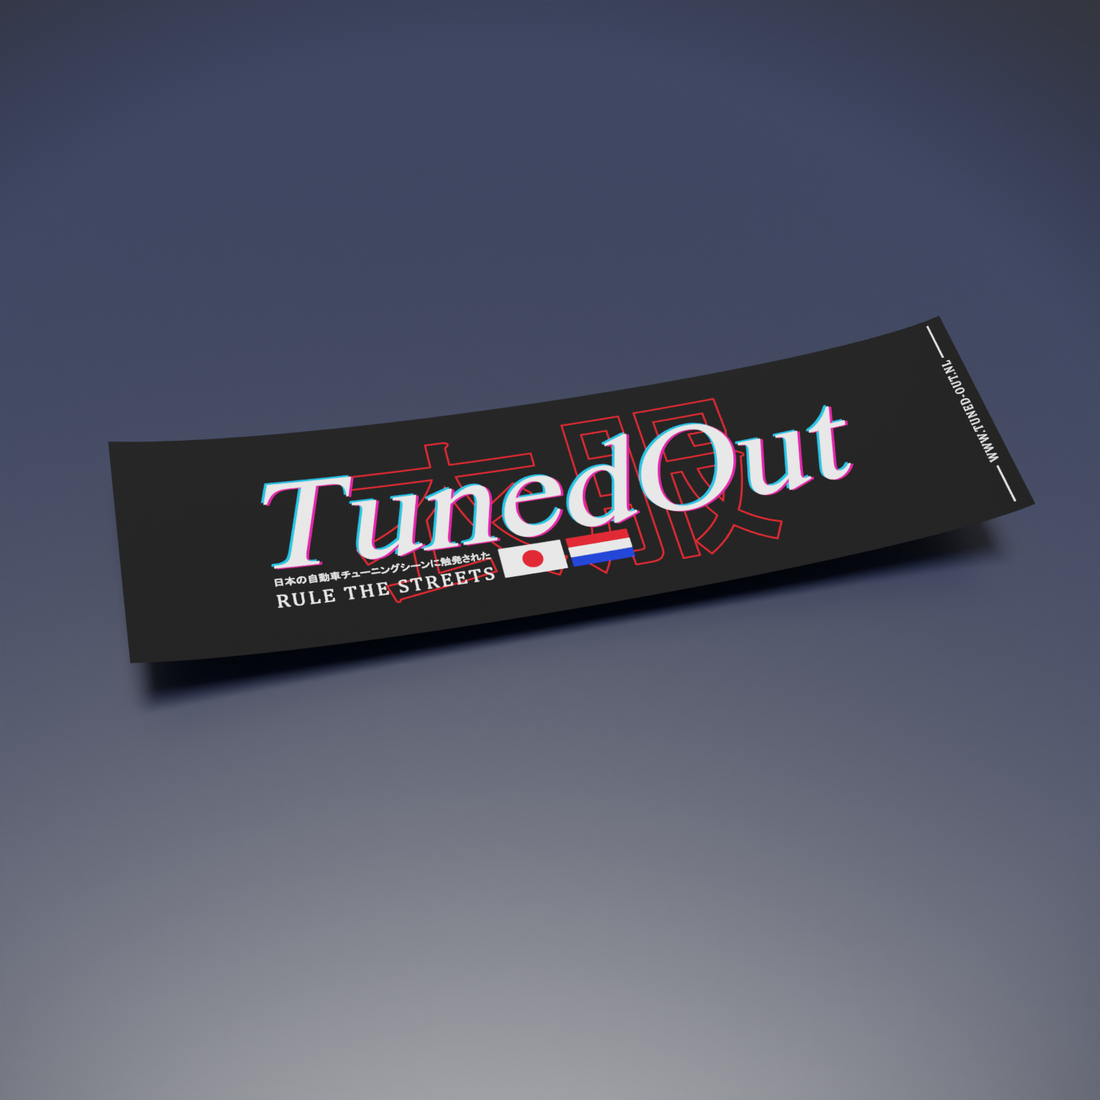 Tuned Out Rule the Streets sticker